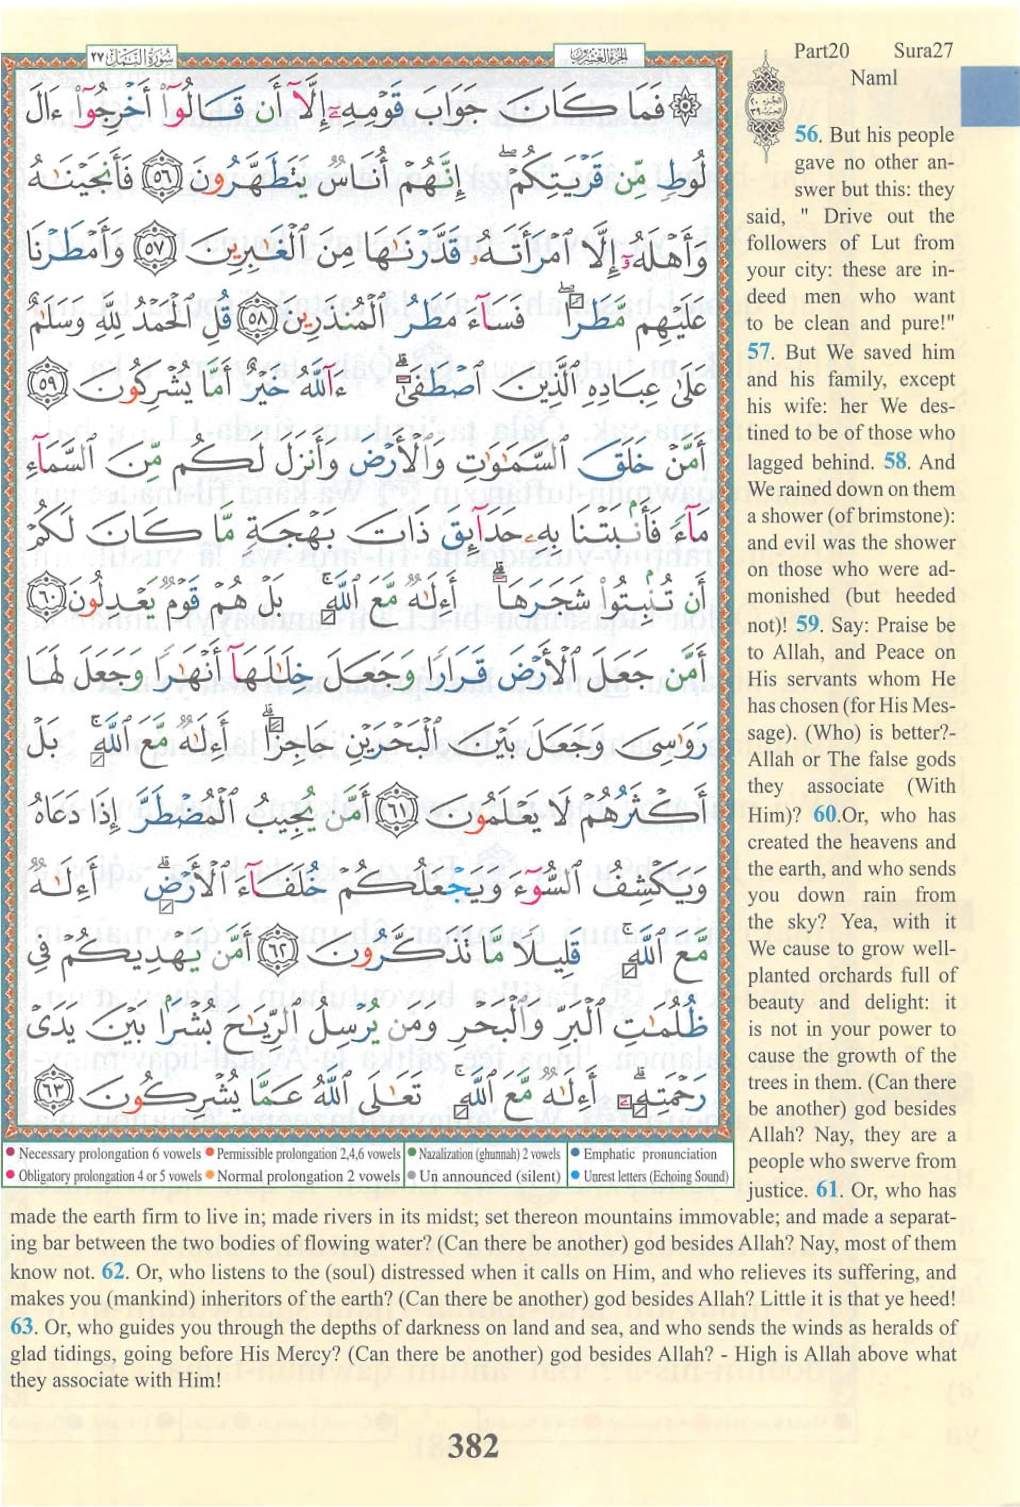 Part20 Sura27 Naml 56. but His People Gave No Other An- Swer But